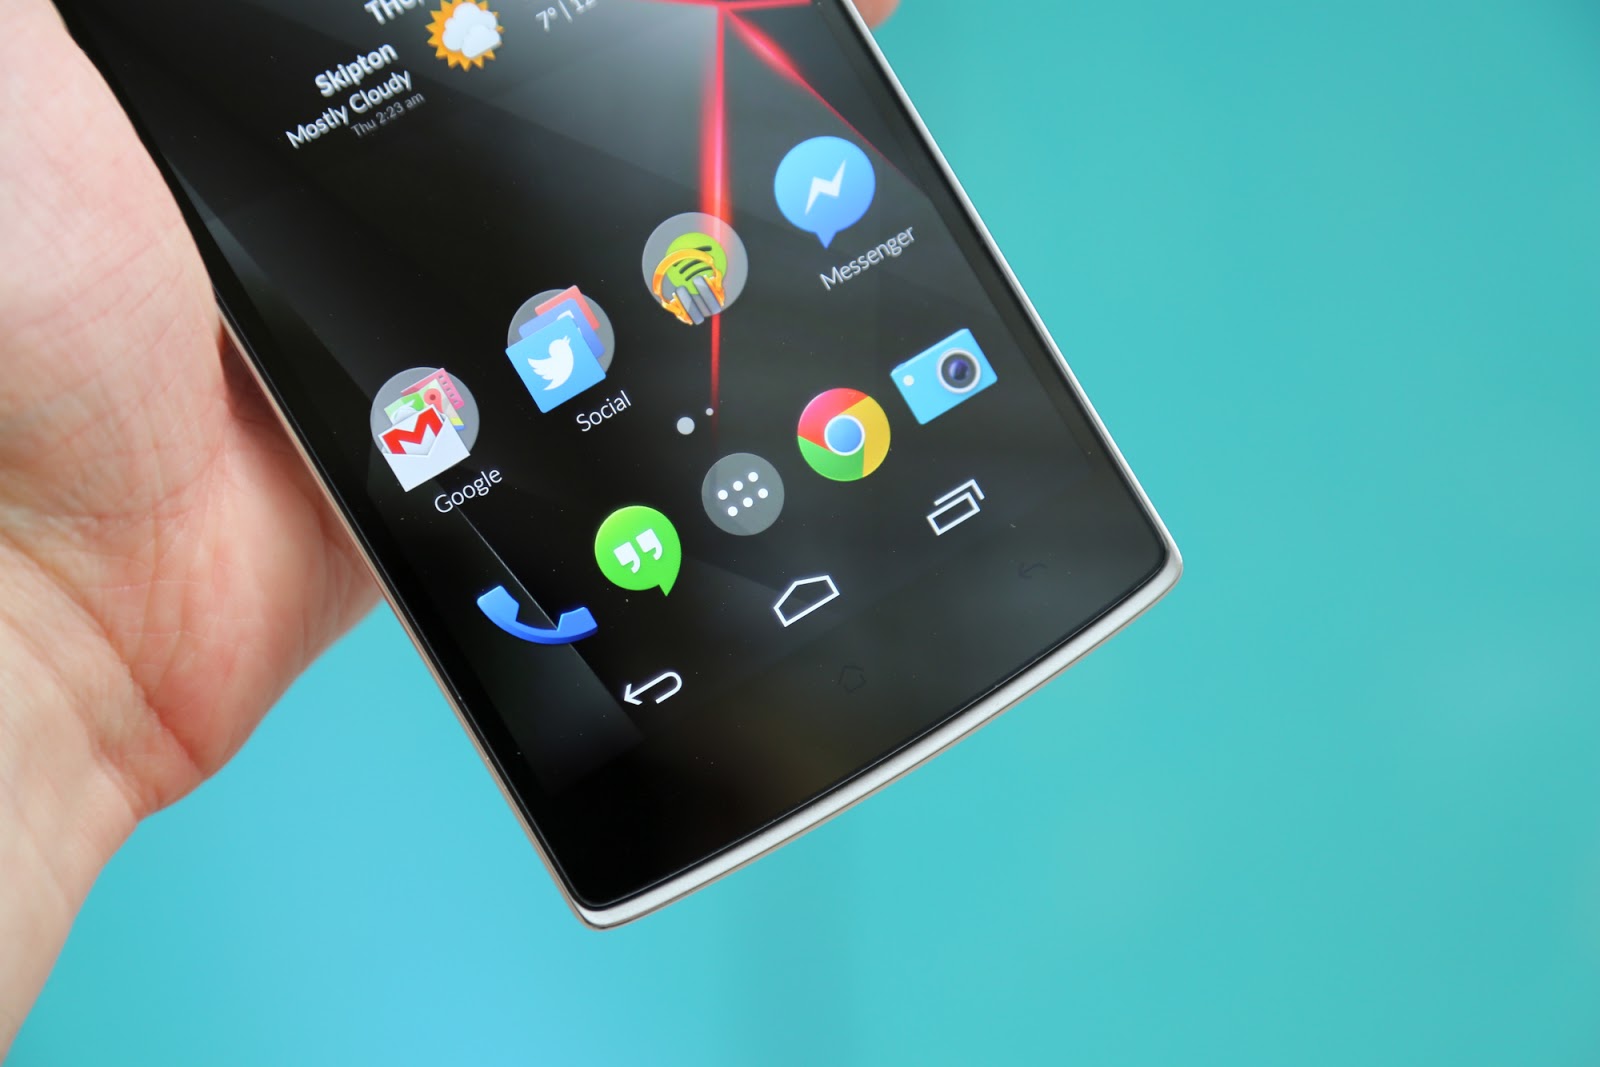 Lollipop 5.1.1. ONEPLUS 2015 года. Android one Plus. ONEPLUS Pad. Oneplus support ru